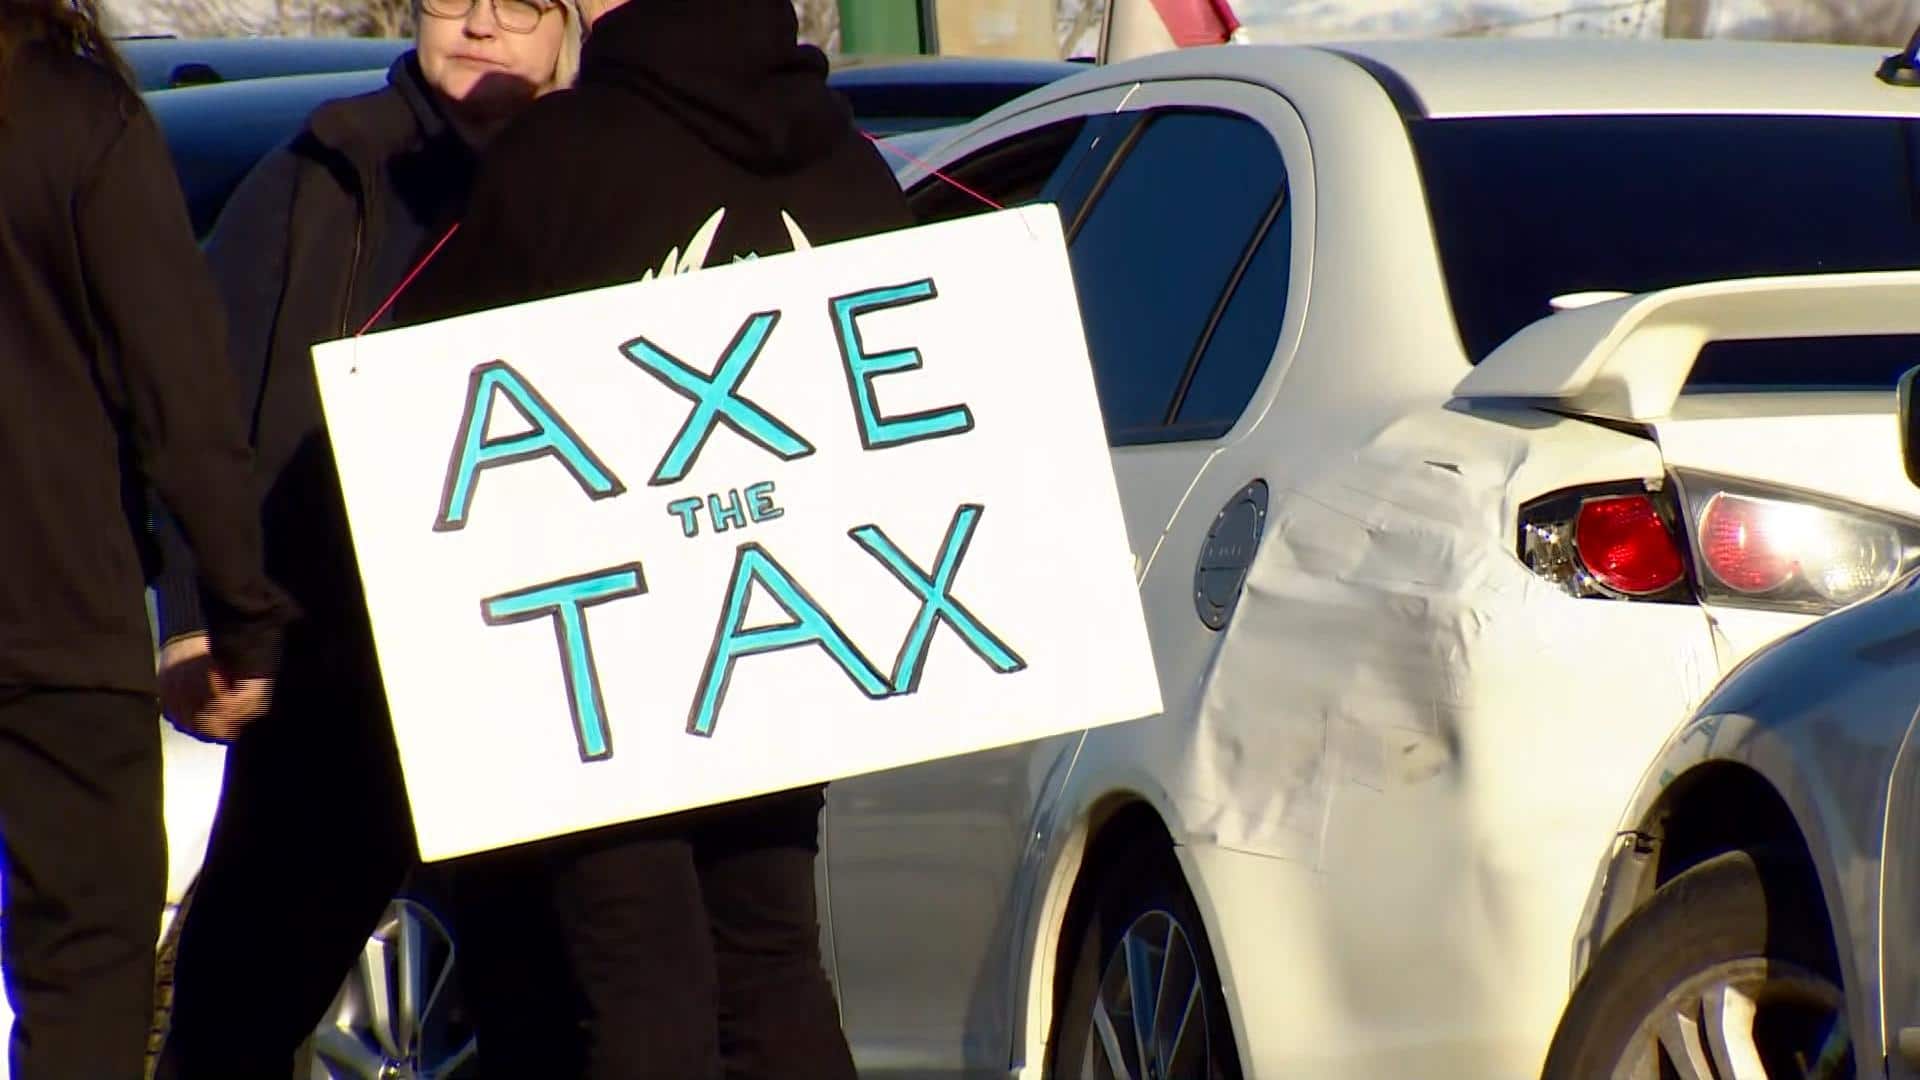 Carbon tax protesters across Canada make their dissatisfaction heard [Video]